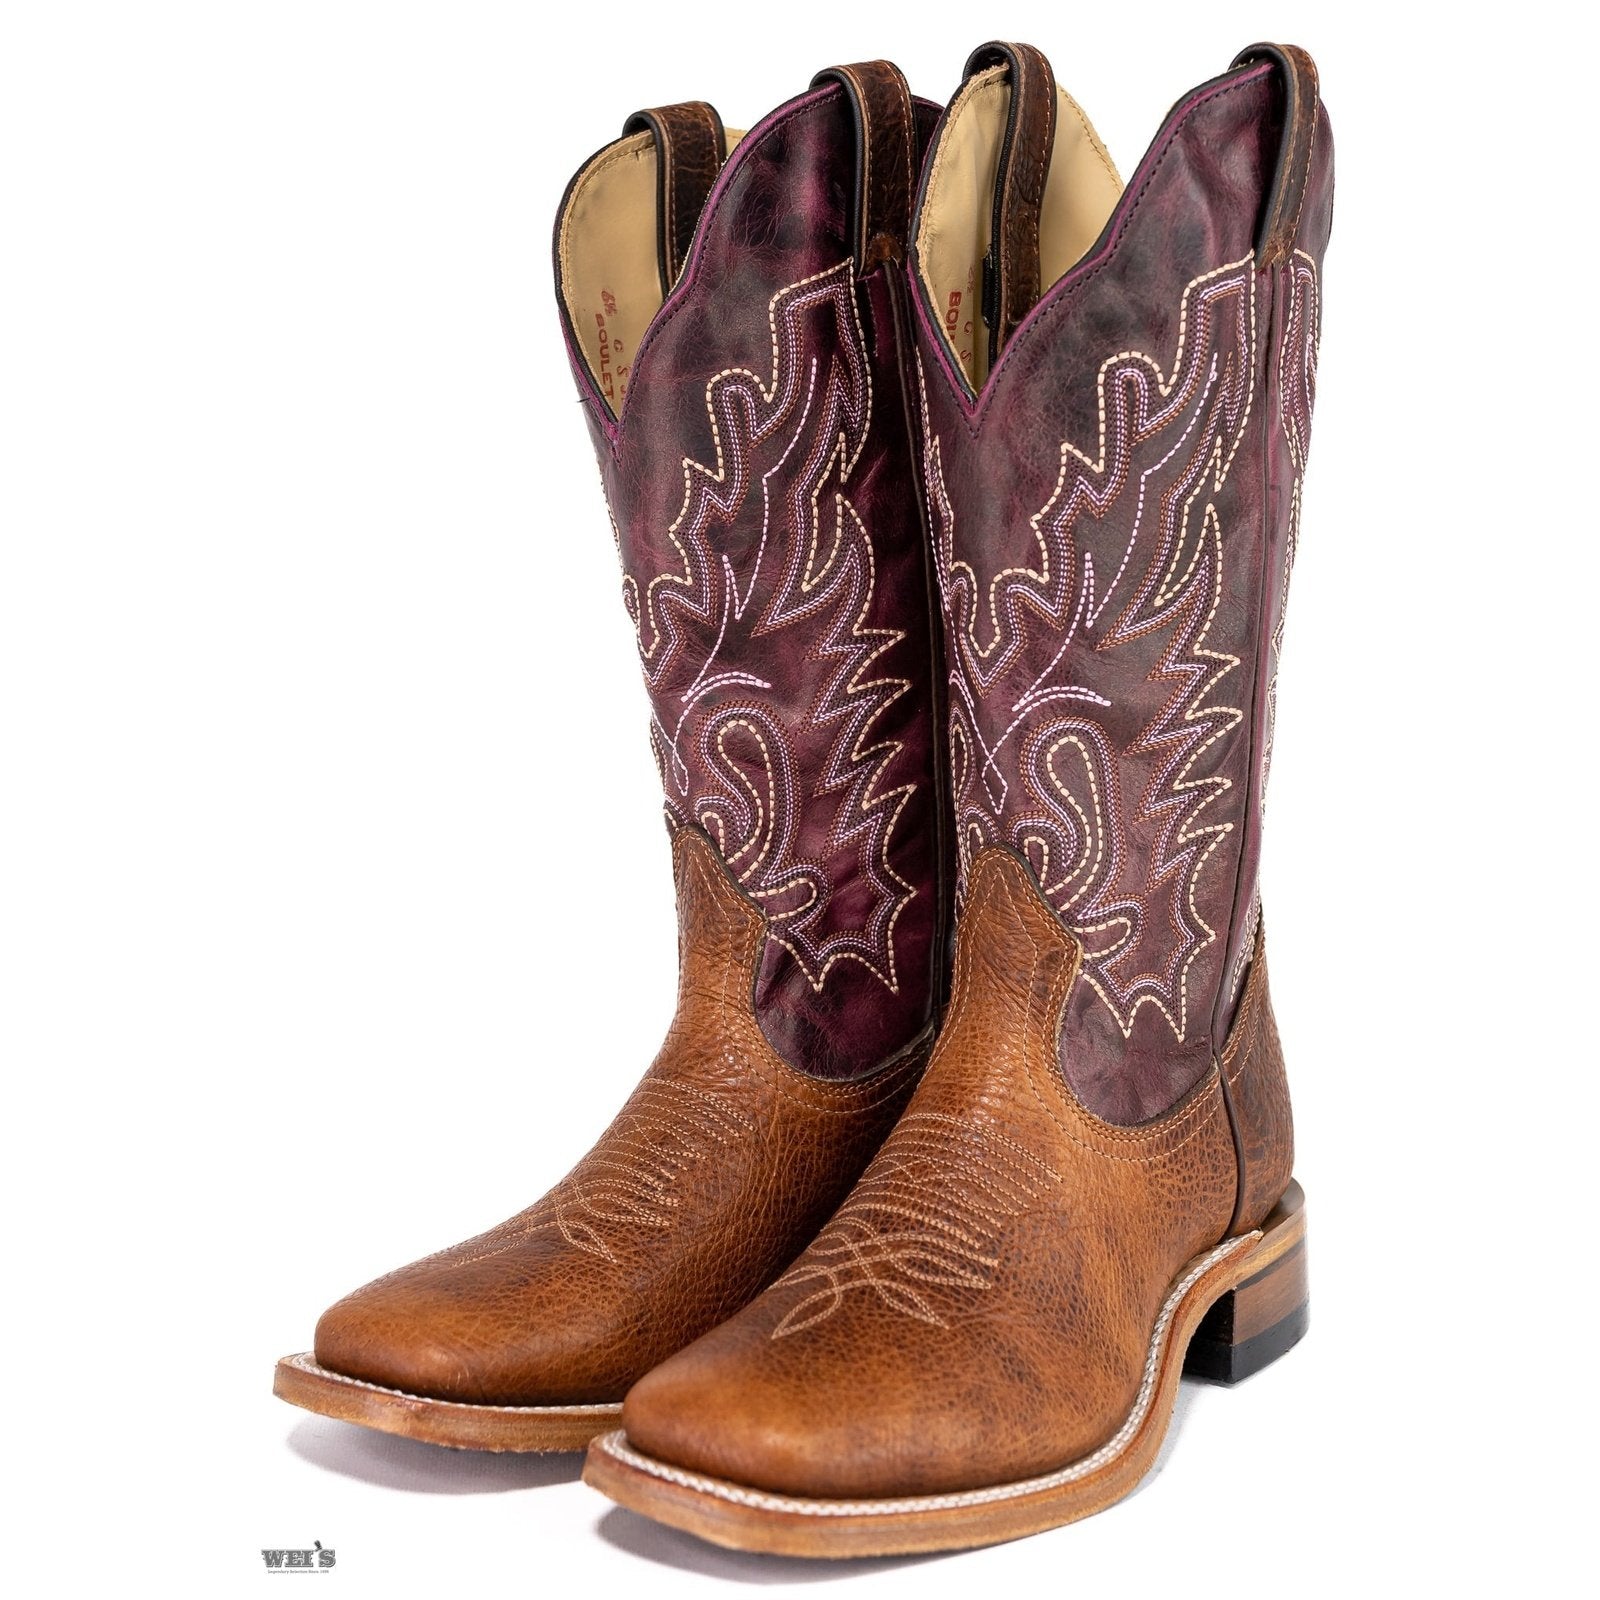 Boulet Women’s Cowgirl Boots 13" Magenta Shaft Wide Square Toe 6251 - Boulet